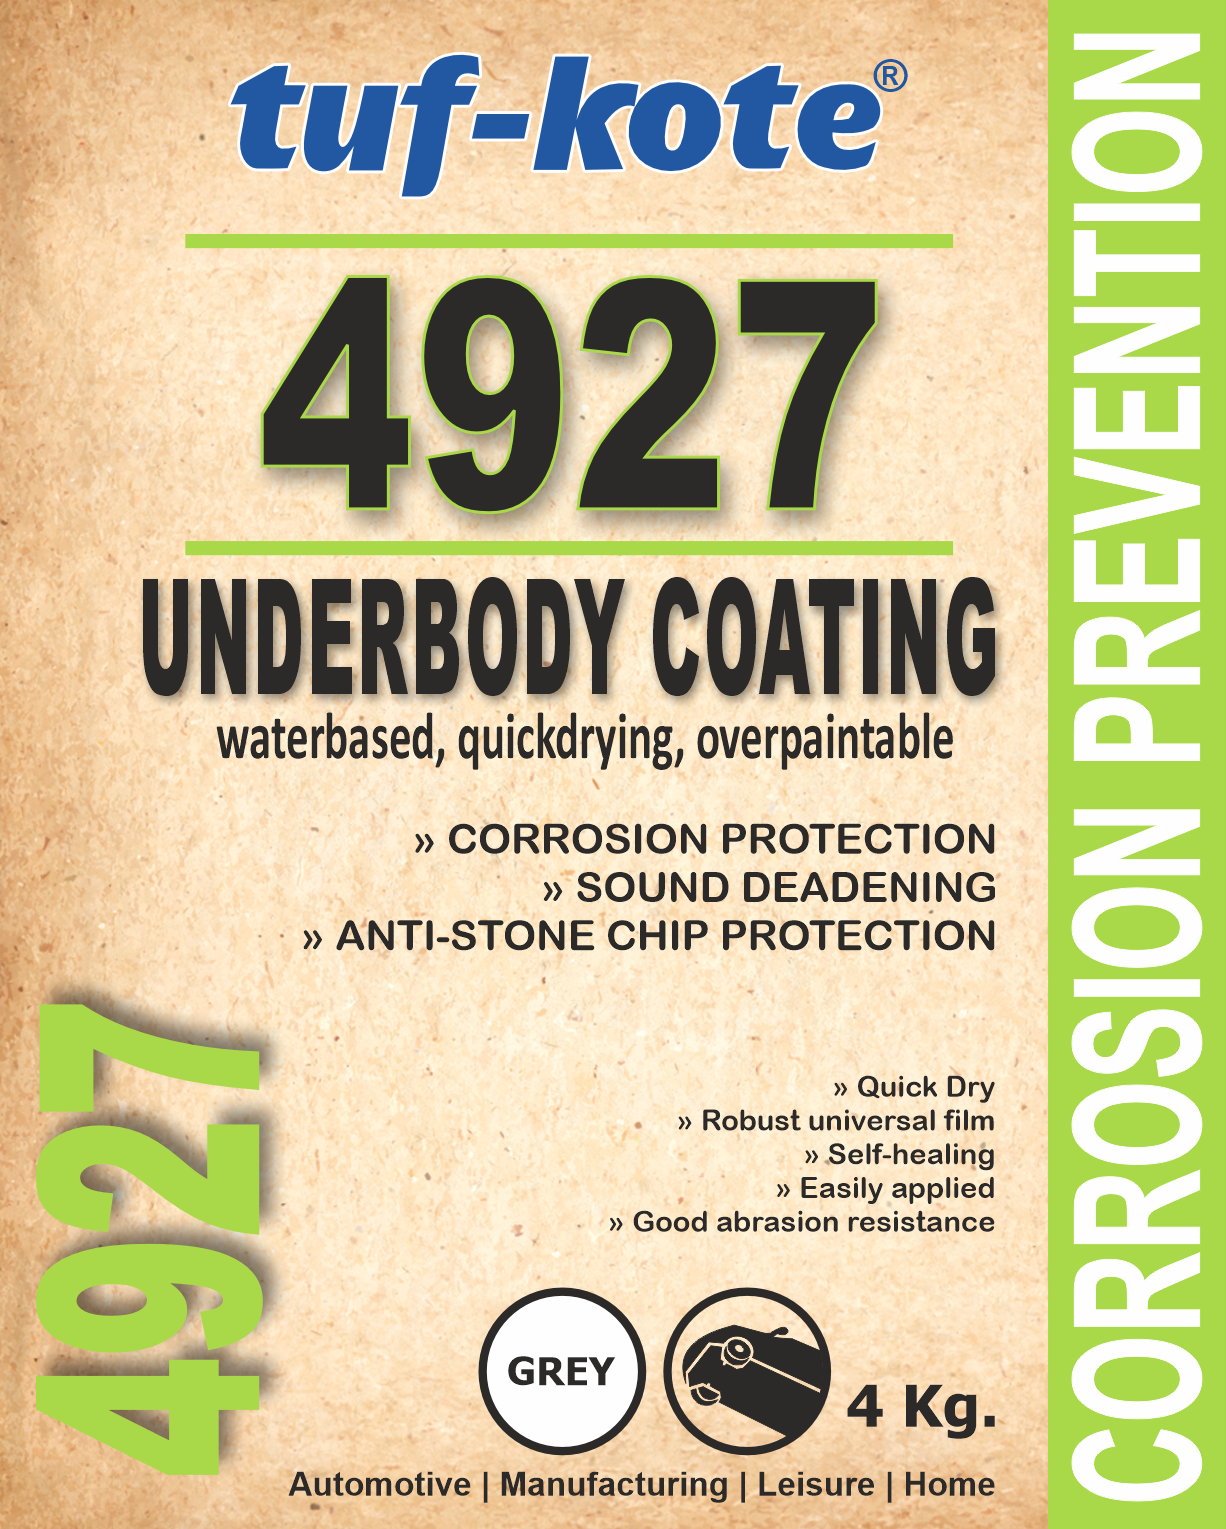 tuf-kote® 4927 WATERBASED Underbody Coating, Corrosion Prevention, Sound Deadening, Stone Chip Protection | BLACK